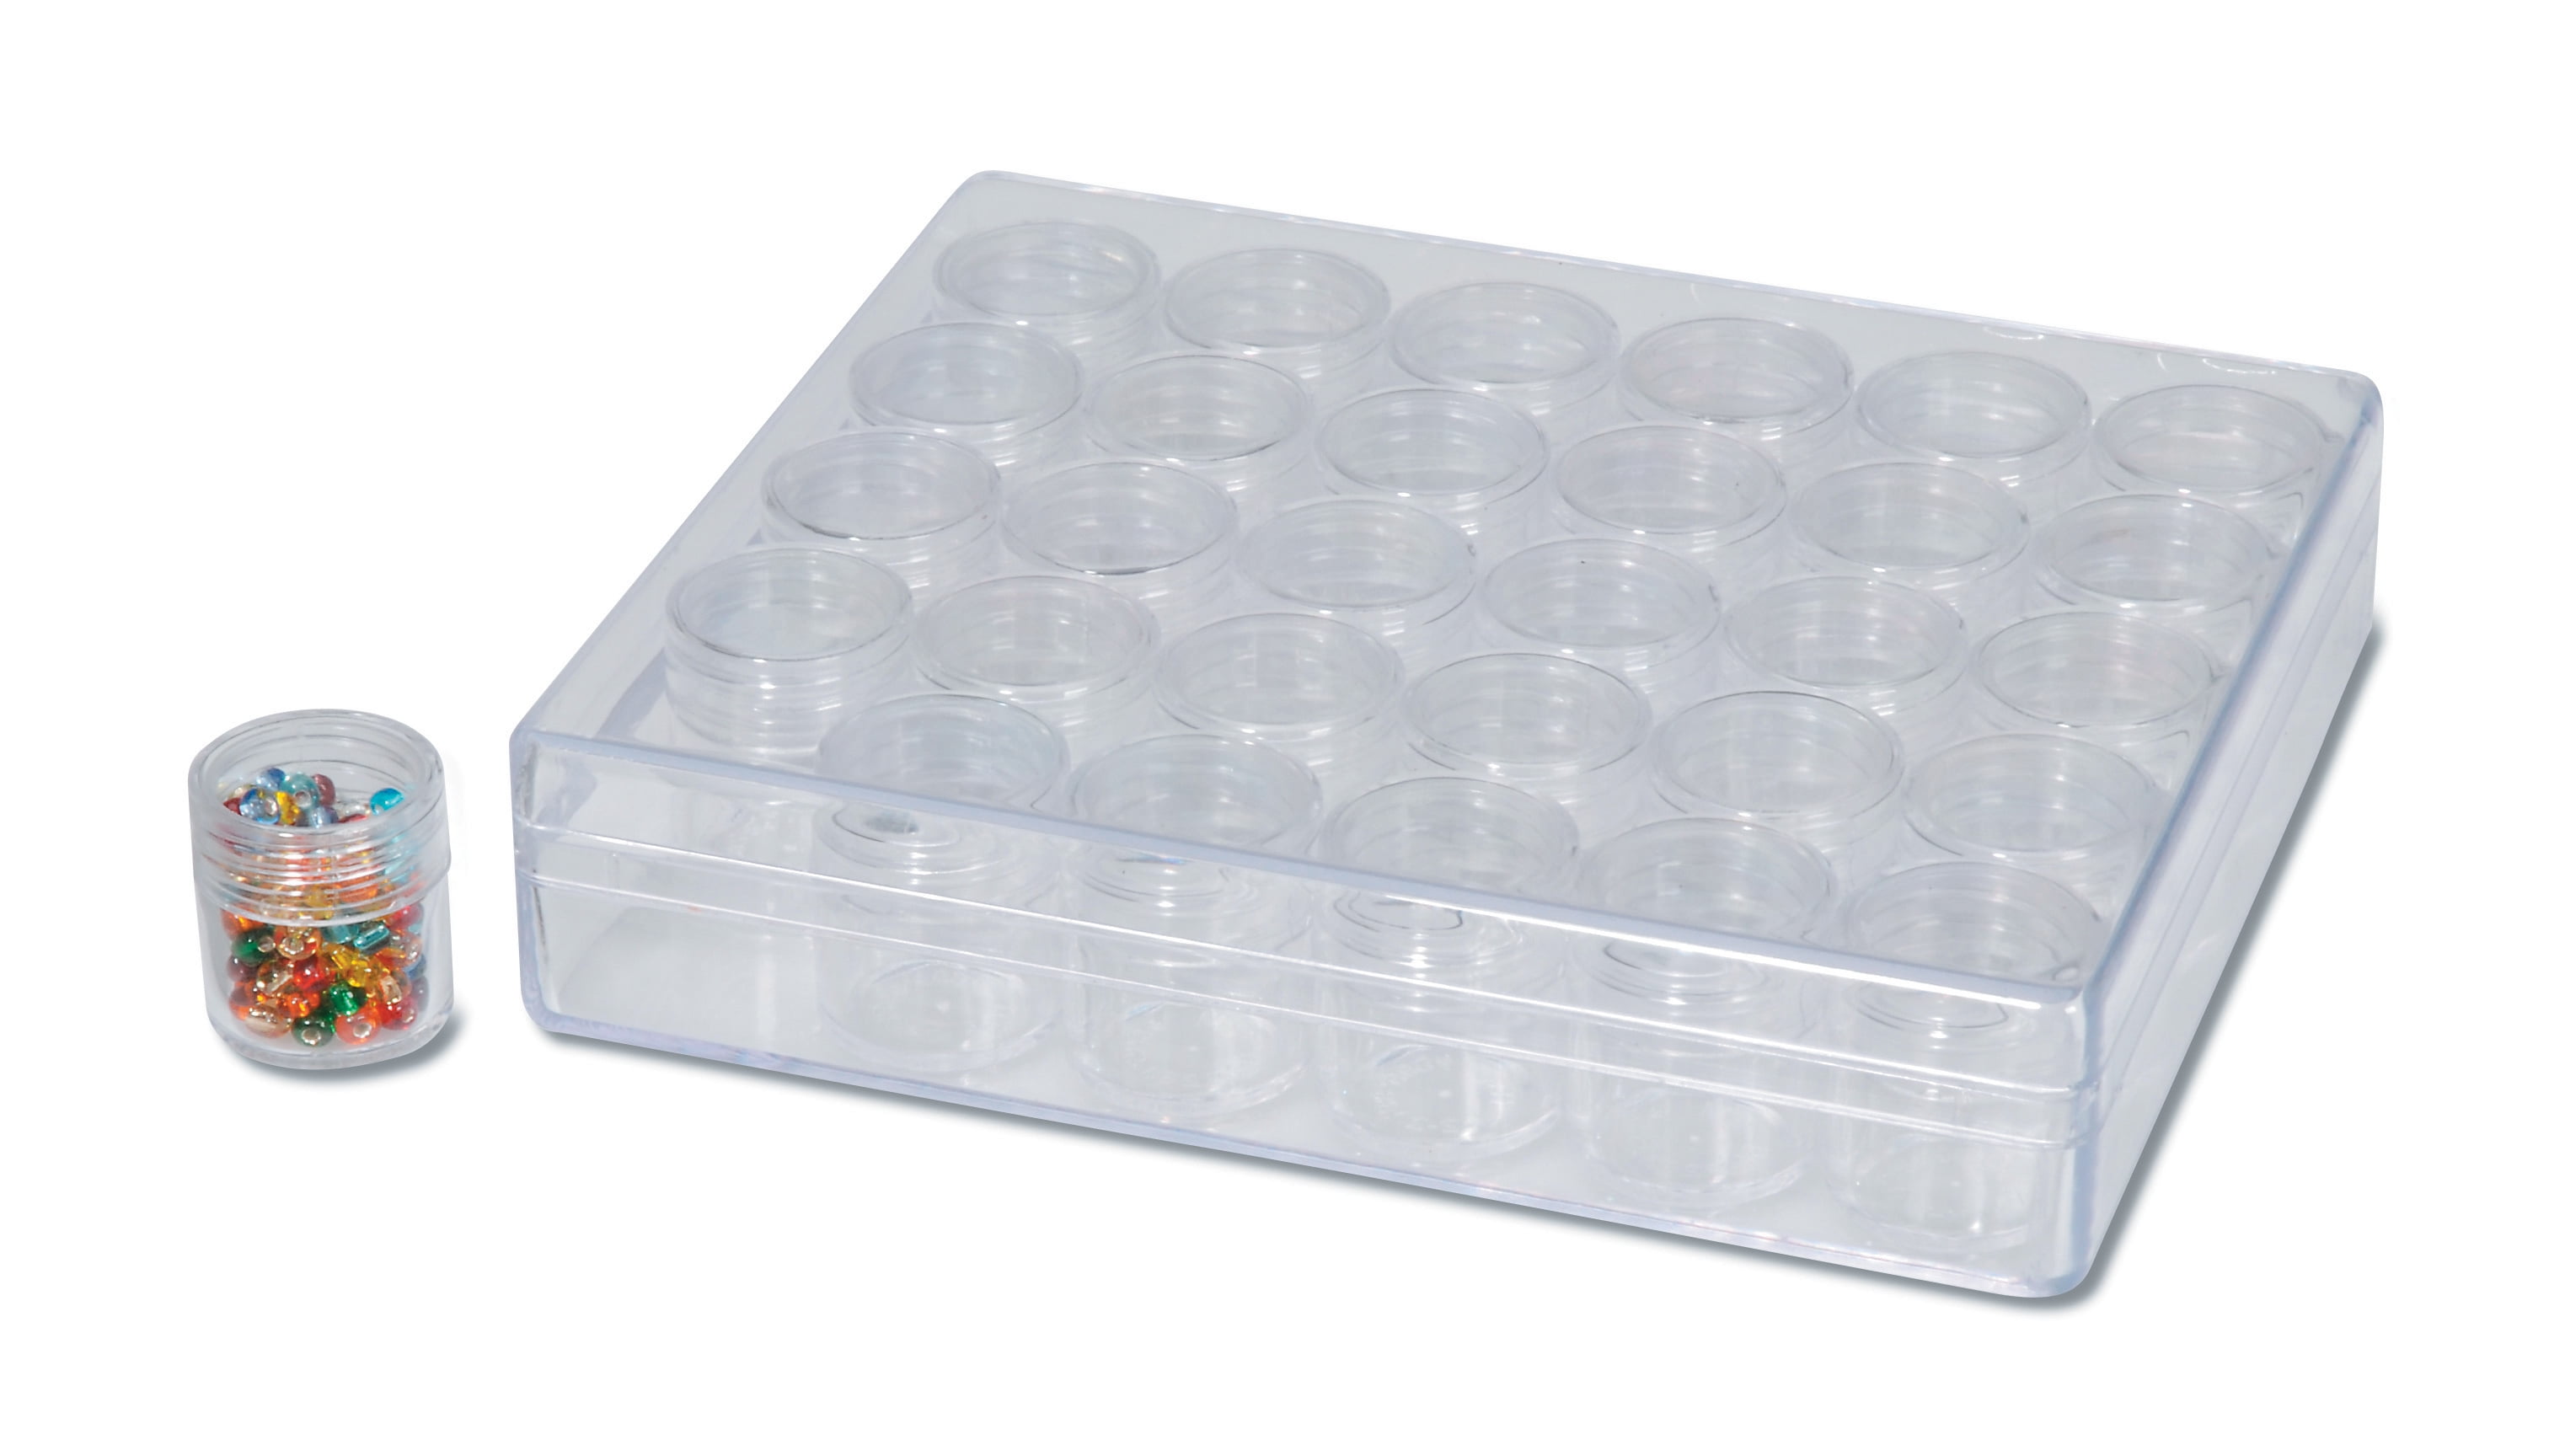 Darice Clear Plastic Bead Container with 30 Small Storage Canisters